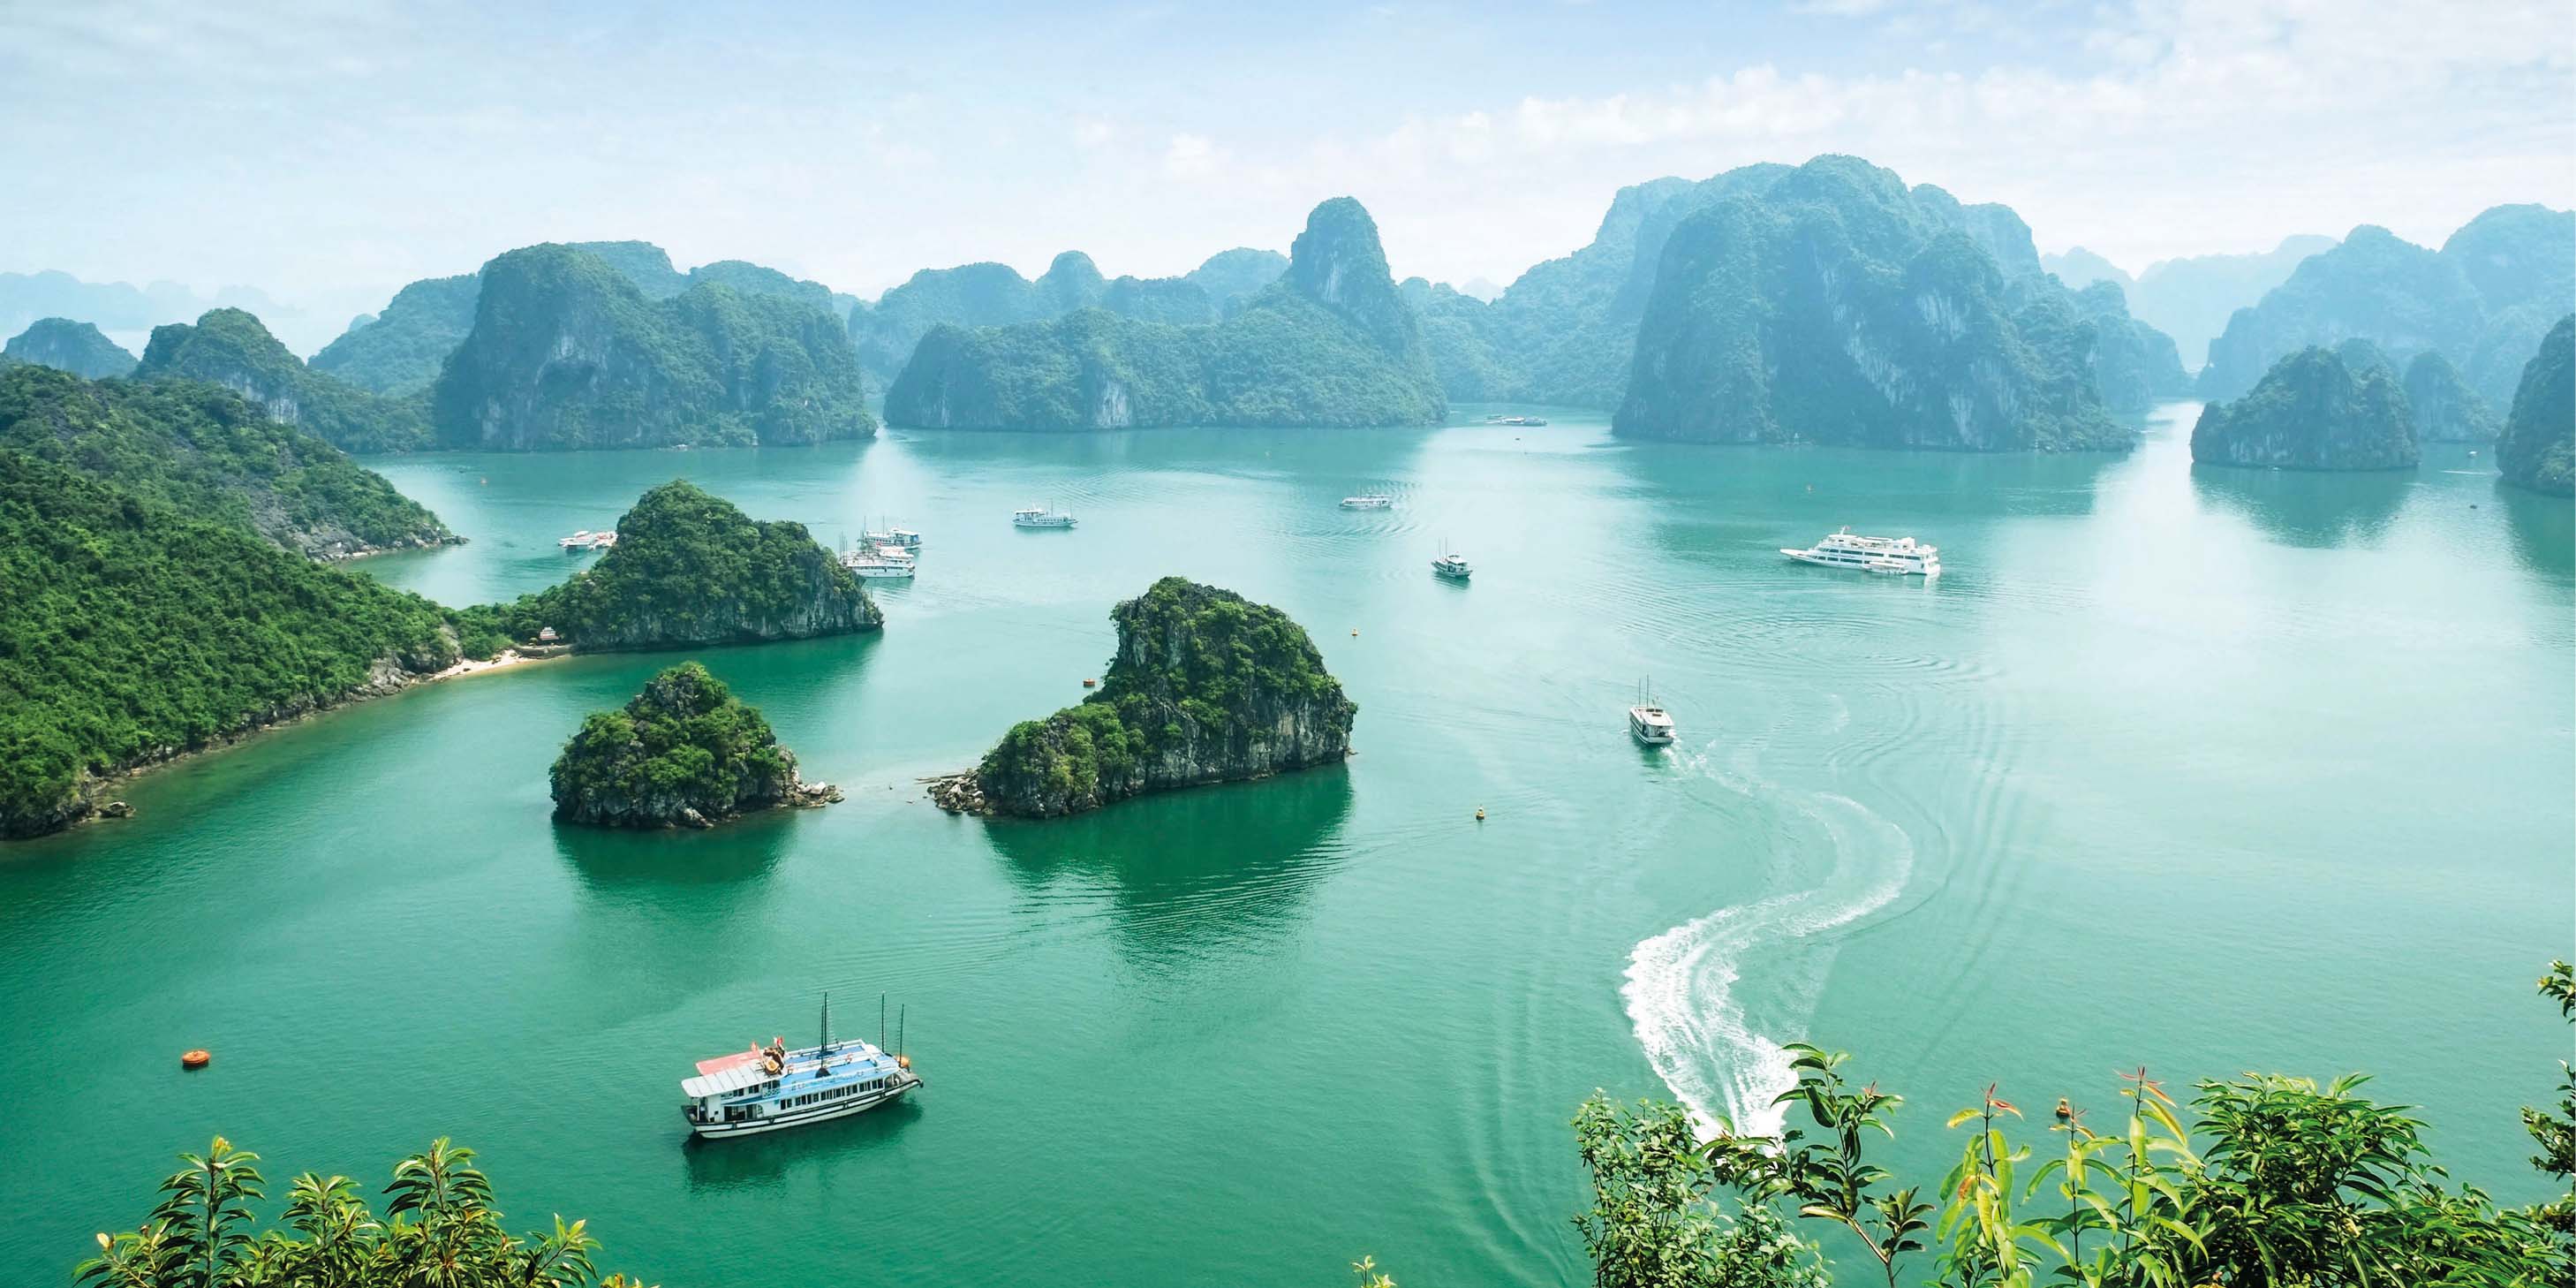 Halong Bay, Vietnam, with fishing boats sailing near the coast, island cliffs with mist in the background